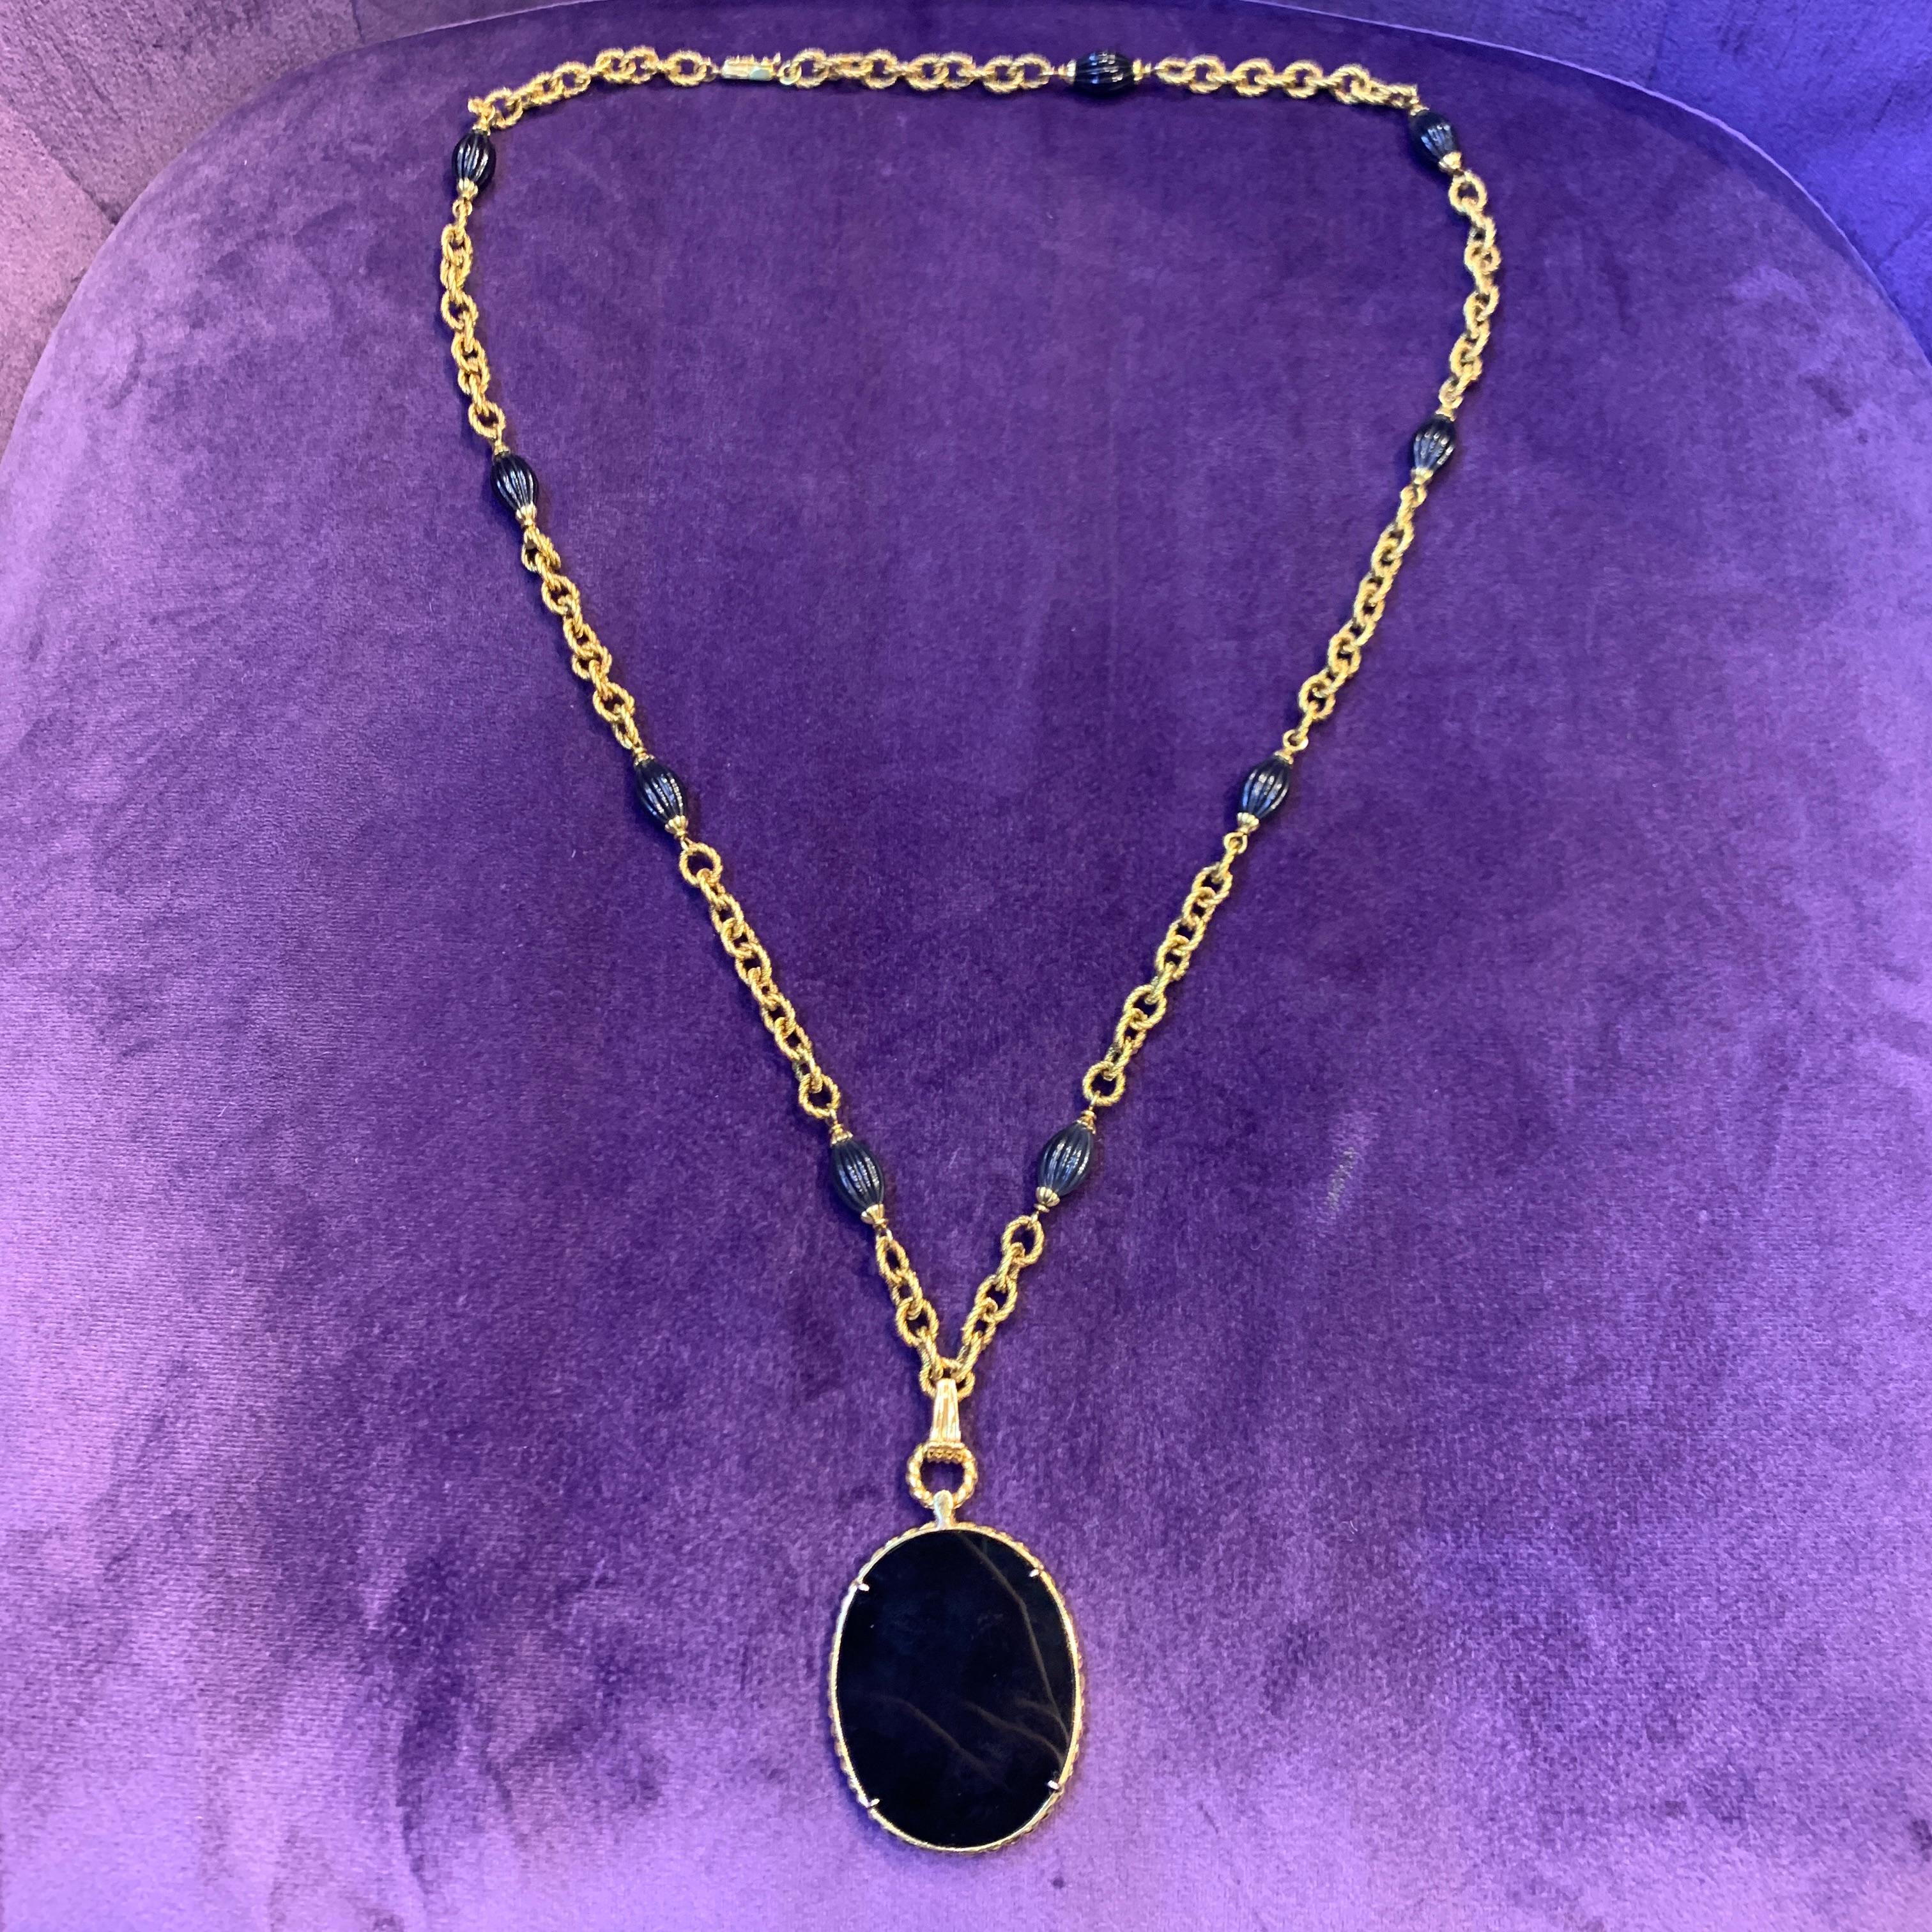 Van Cleef & Arpels Onyx & Diamond Sautoir Necklace In Excellent Condition For Sale In New York, NY